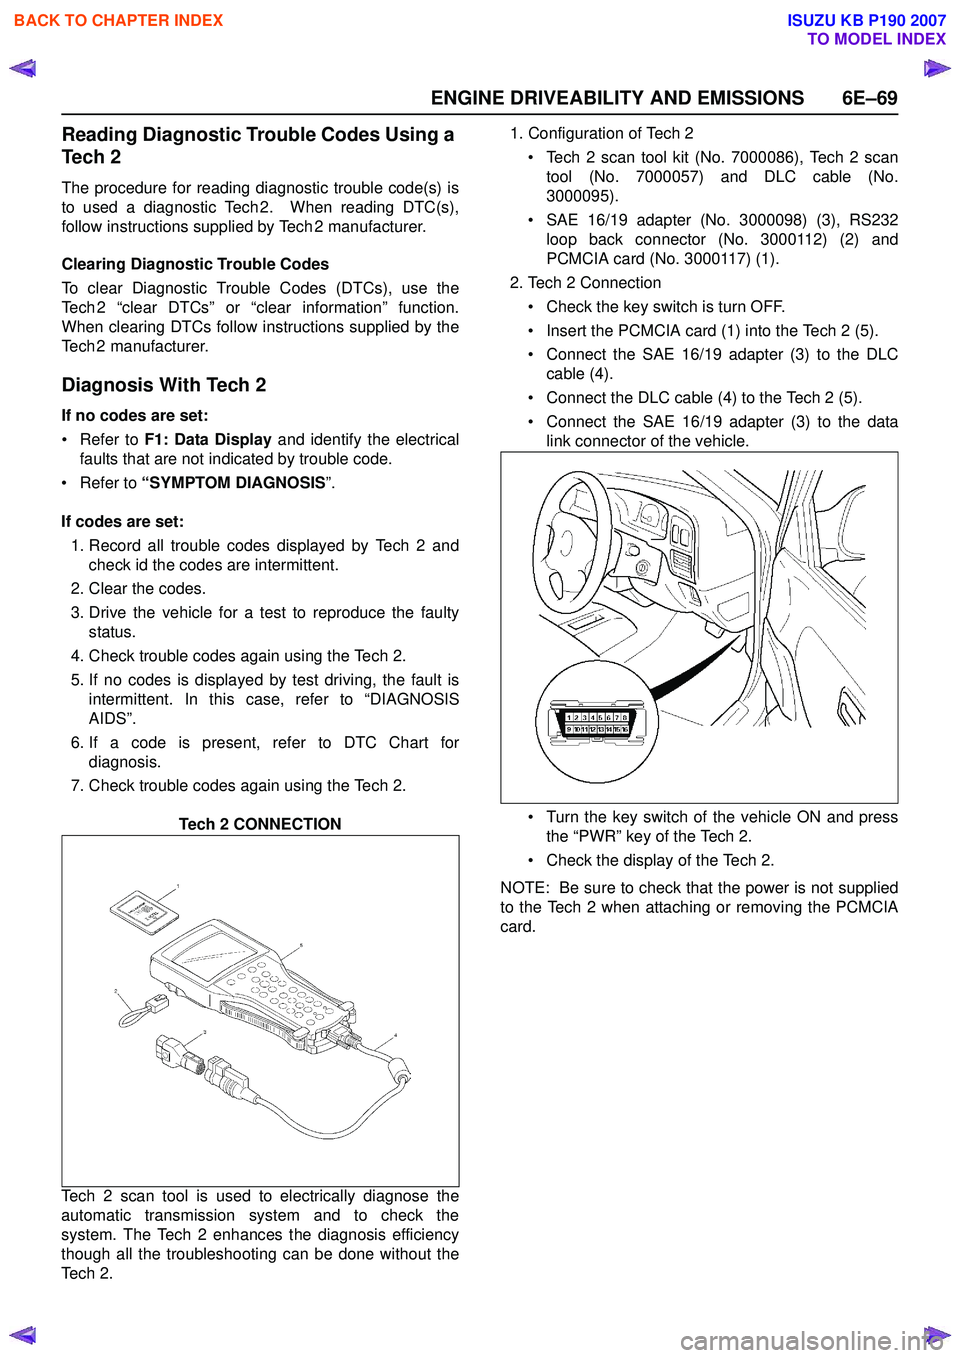 ISUZU KB P190 2007  Workshop Owners Manual ENGINE DRIVEABILITY AND EMISSIONS 6E–69
Reading Diagnostic Trouble Codes Using a  
Te c h  2
The procedure for reading diagnostic trouble code(s) is 
to used a diagnostic Tech 2.  When reading DTC(s